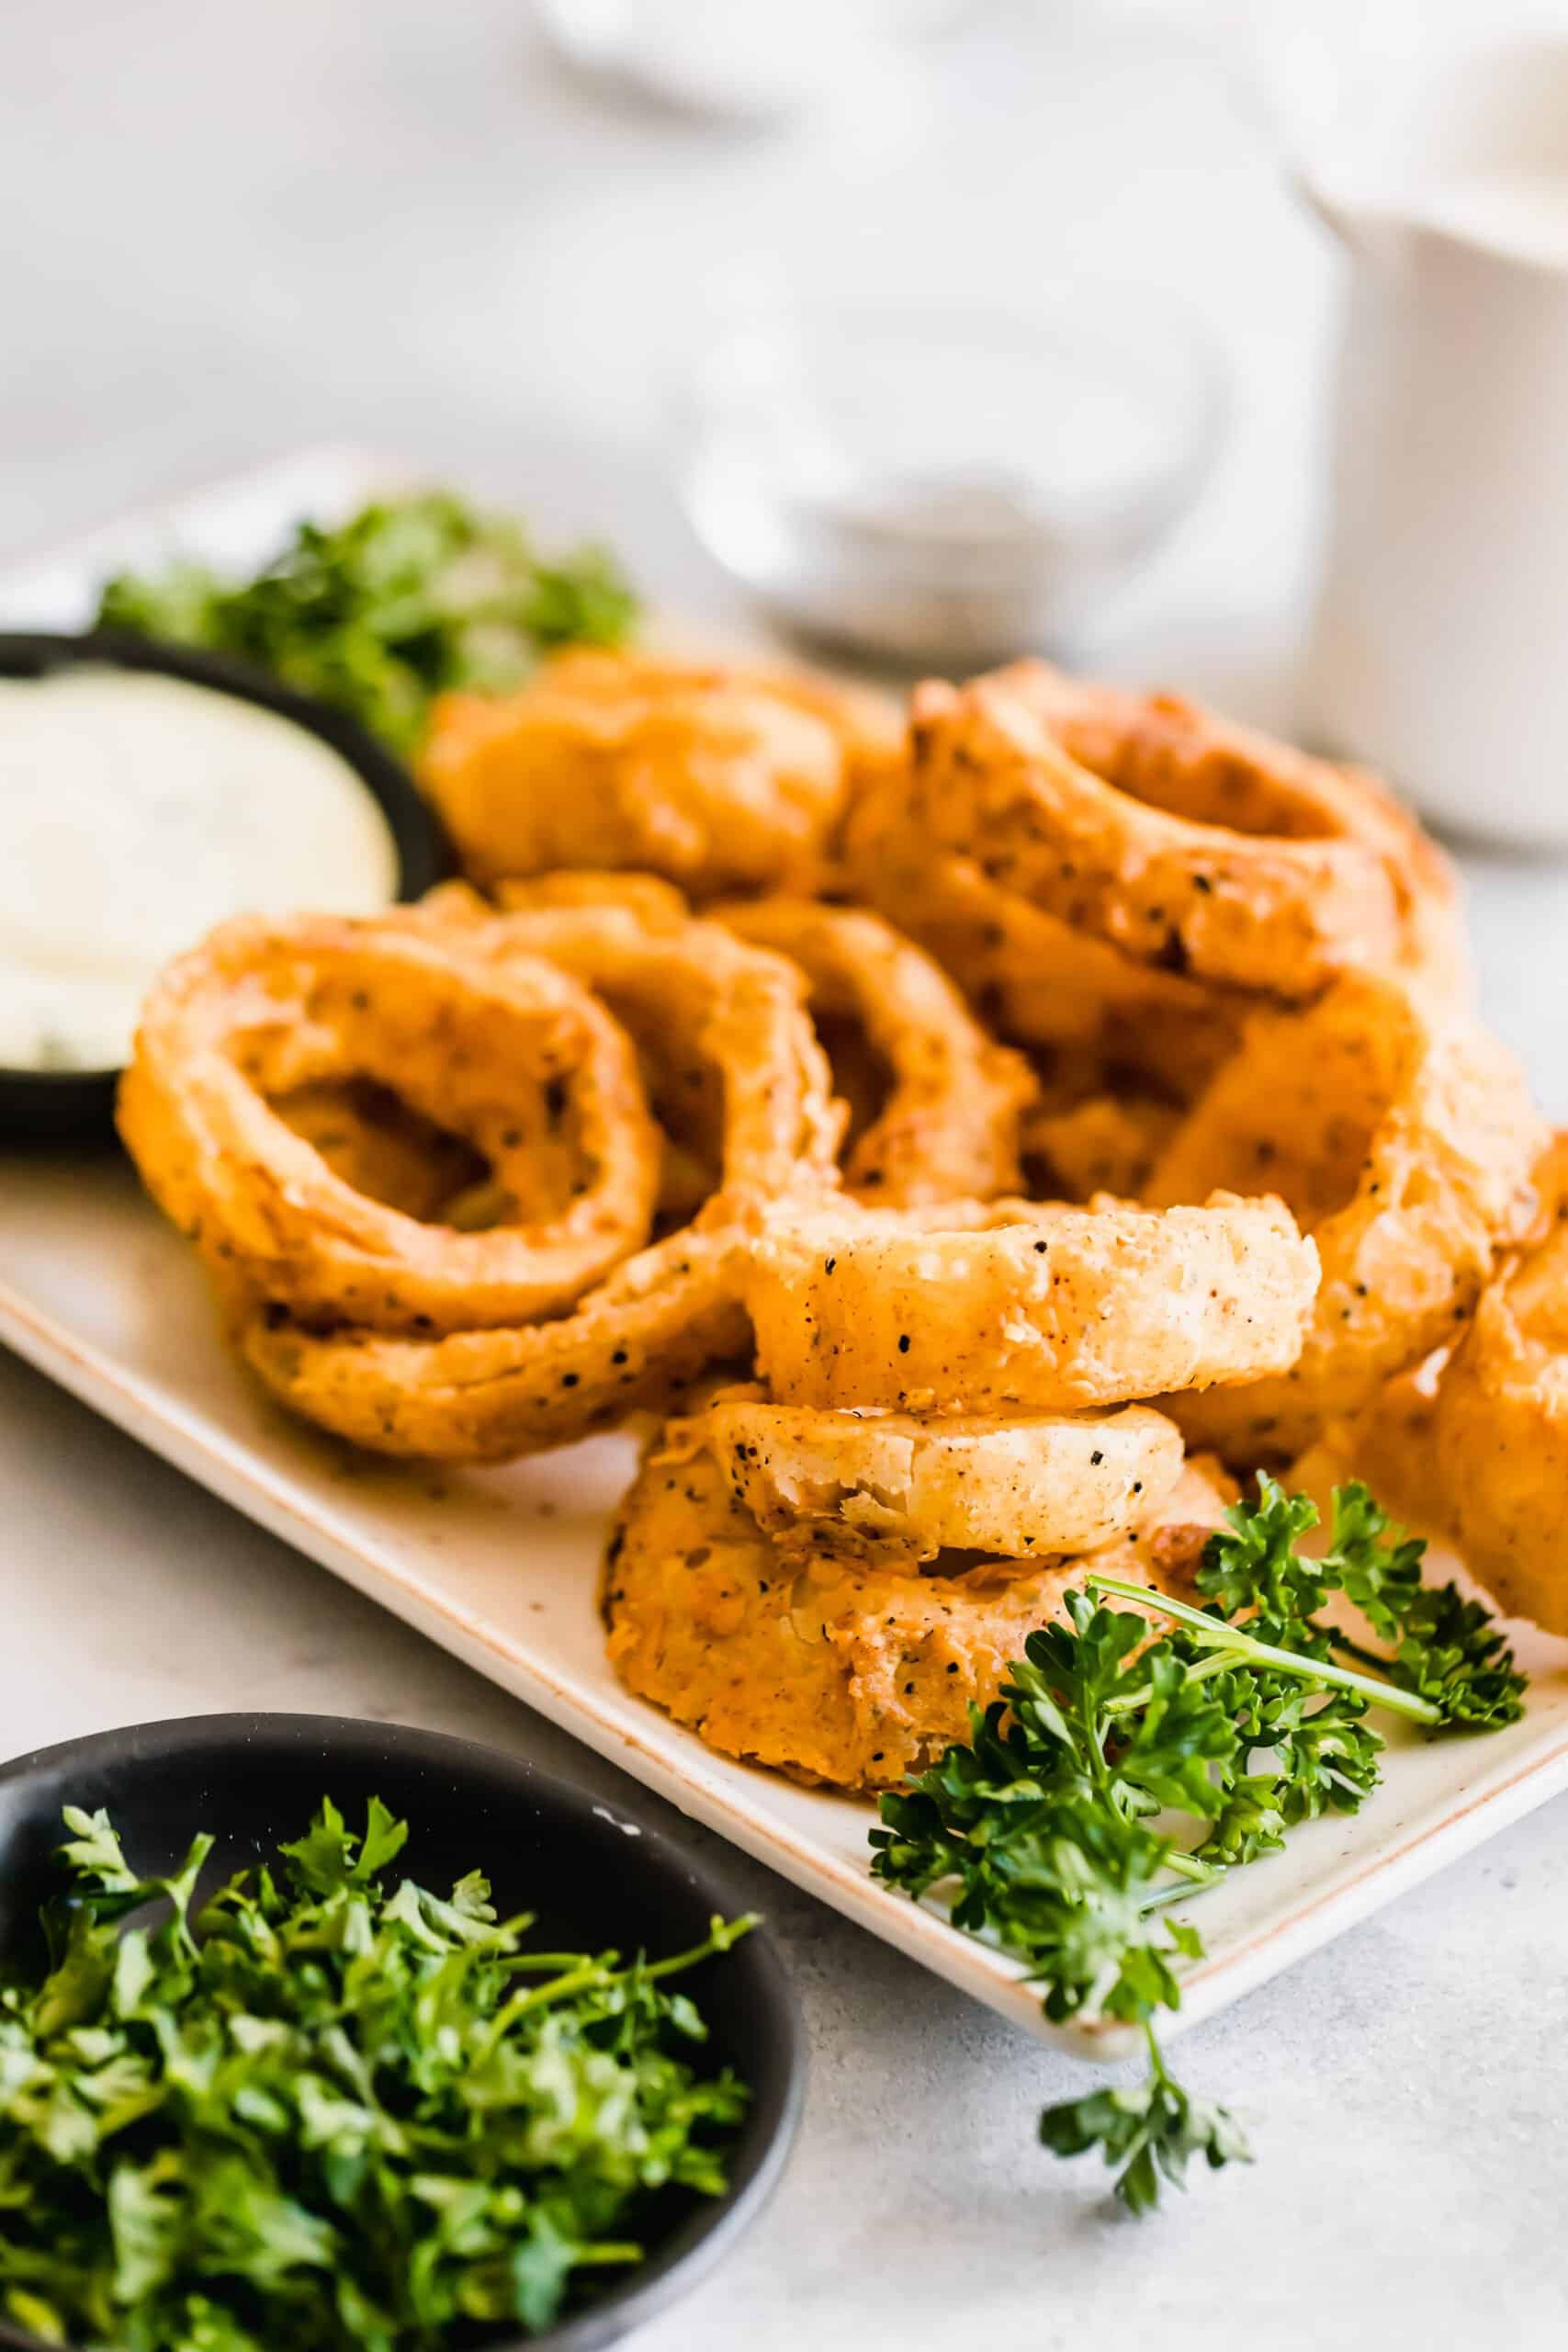 Onion rings with a bowl of dip.